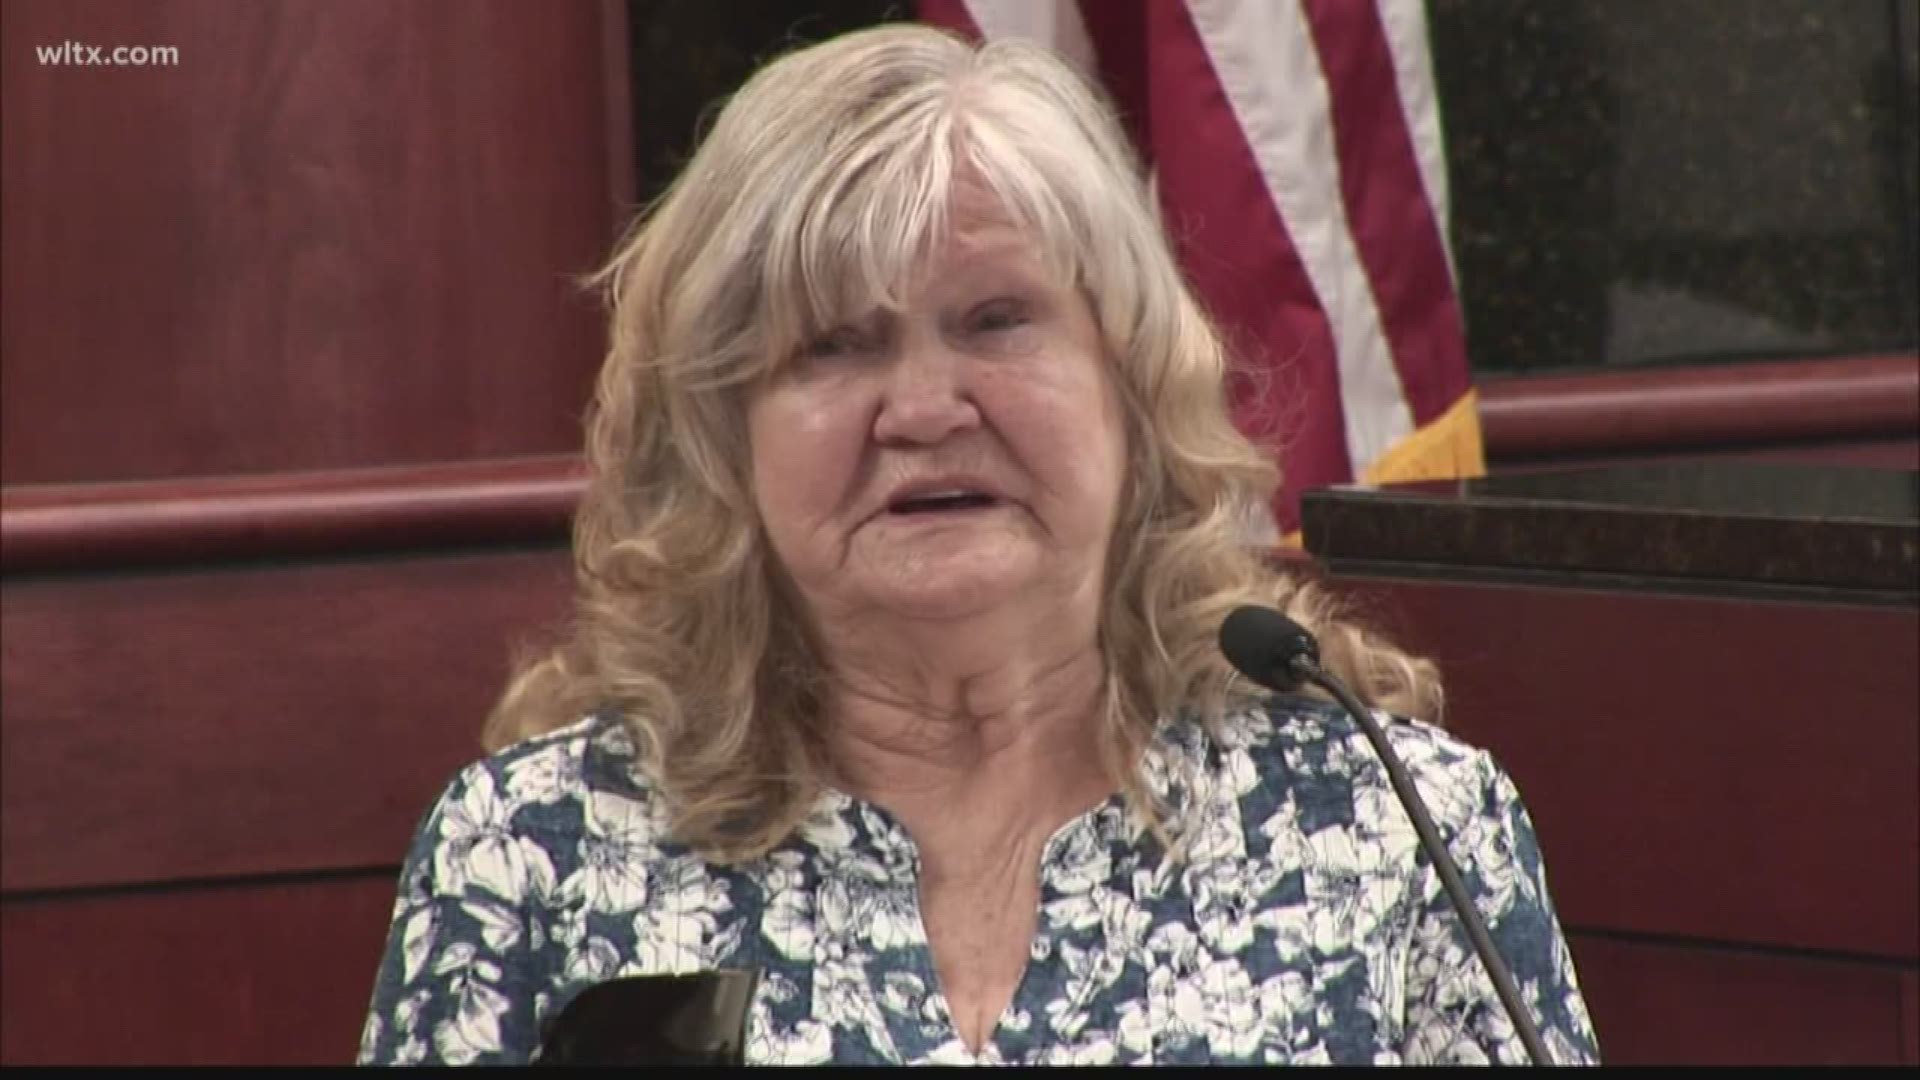 Timothy Ray Jones Jr.'s grandmother took the stand today